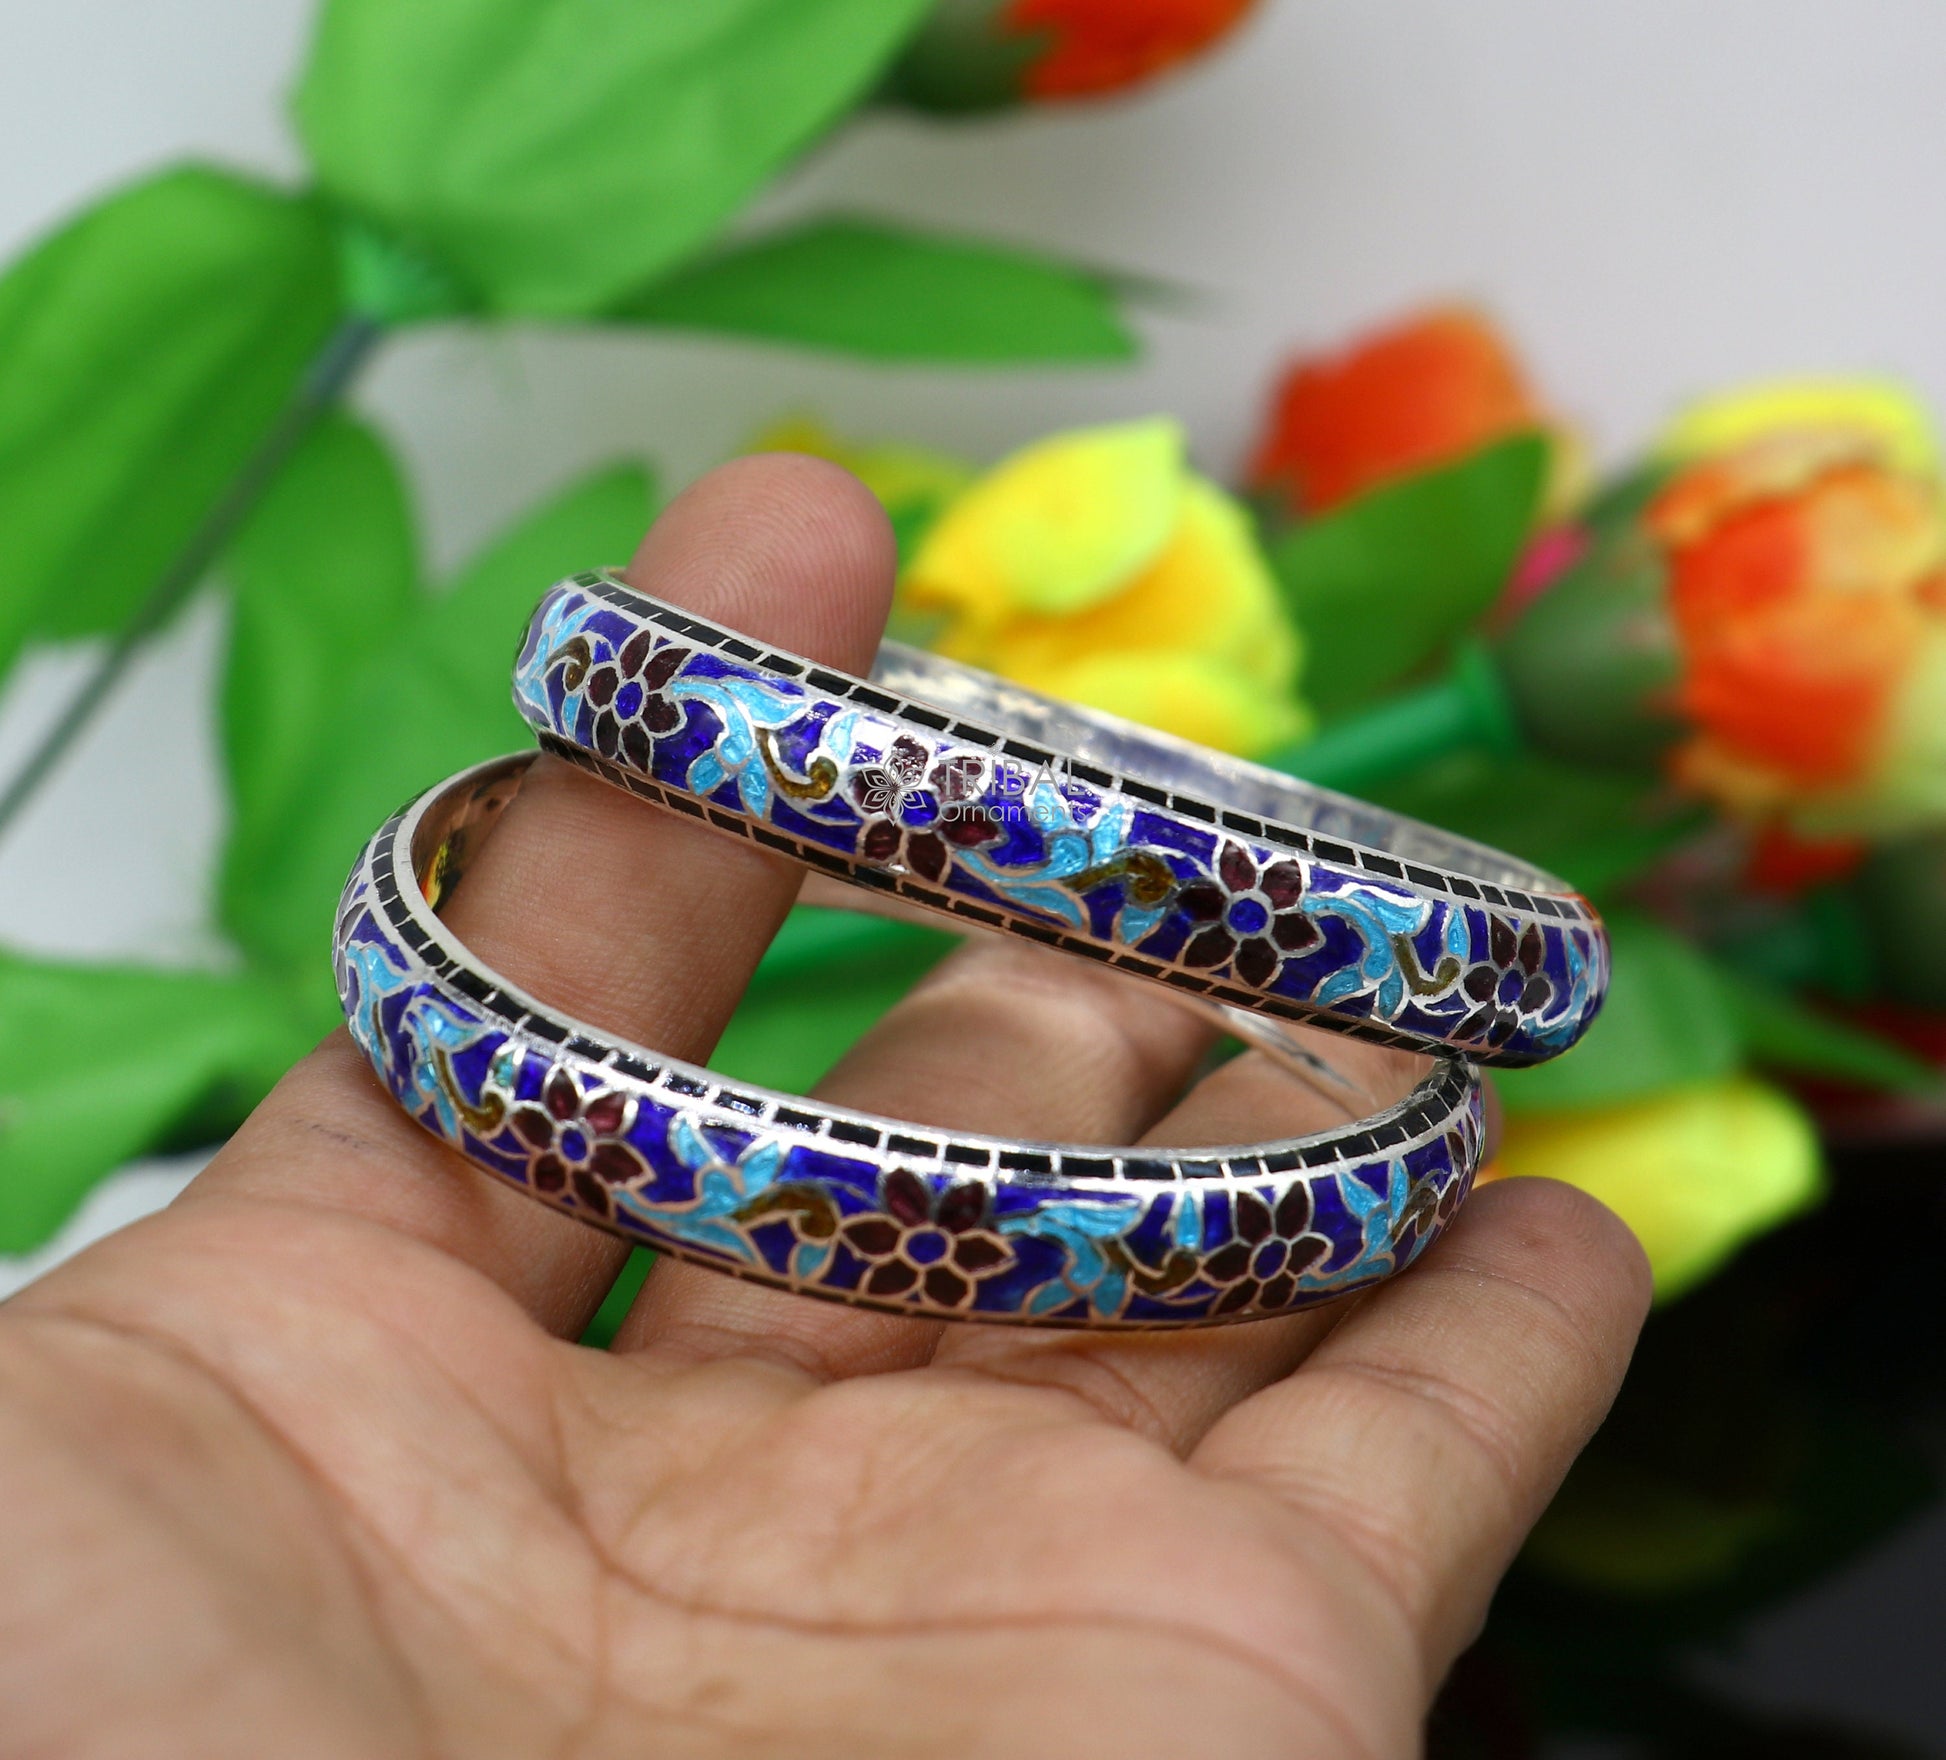 925 Sterling silver Traditional cultural design meenakari (color enamel )bangles bracelet brides trendy style jewelry from india nba363 - TRIBAL ORNAMENTS